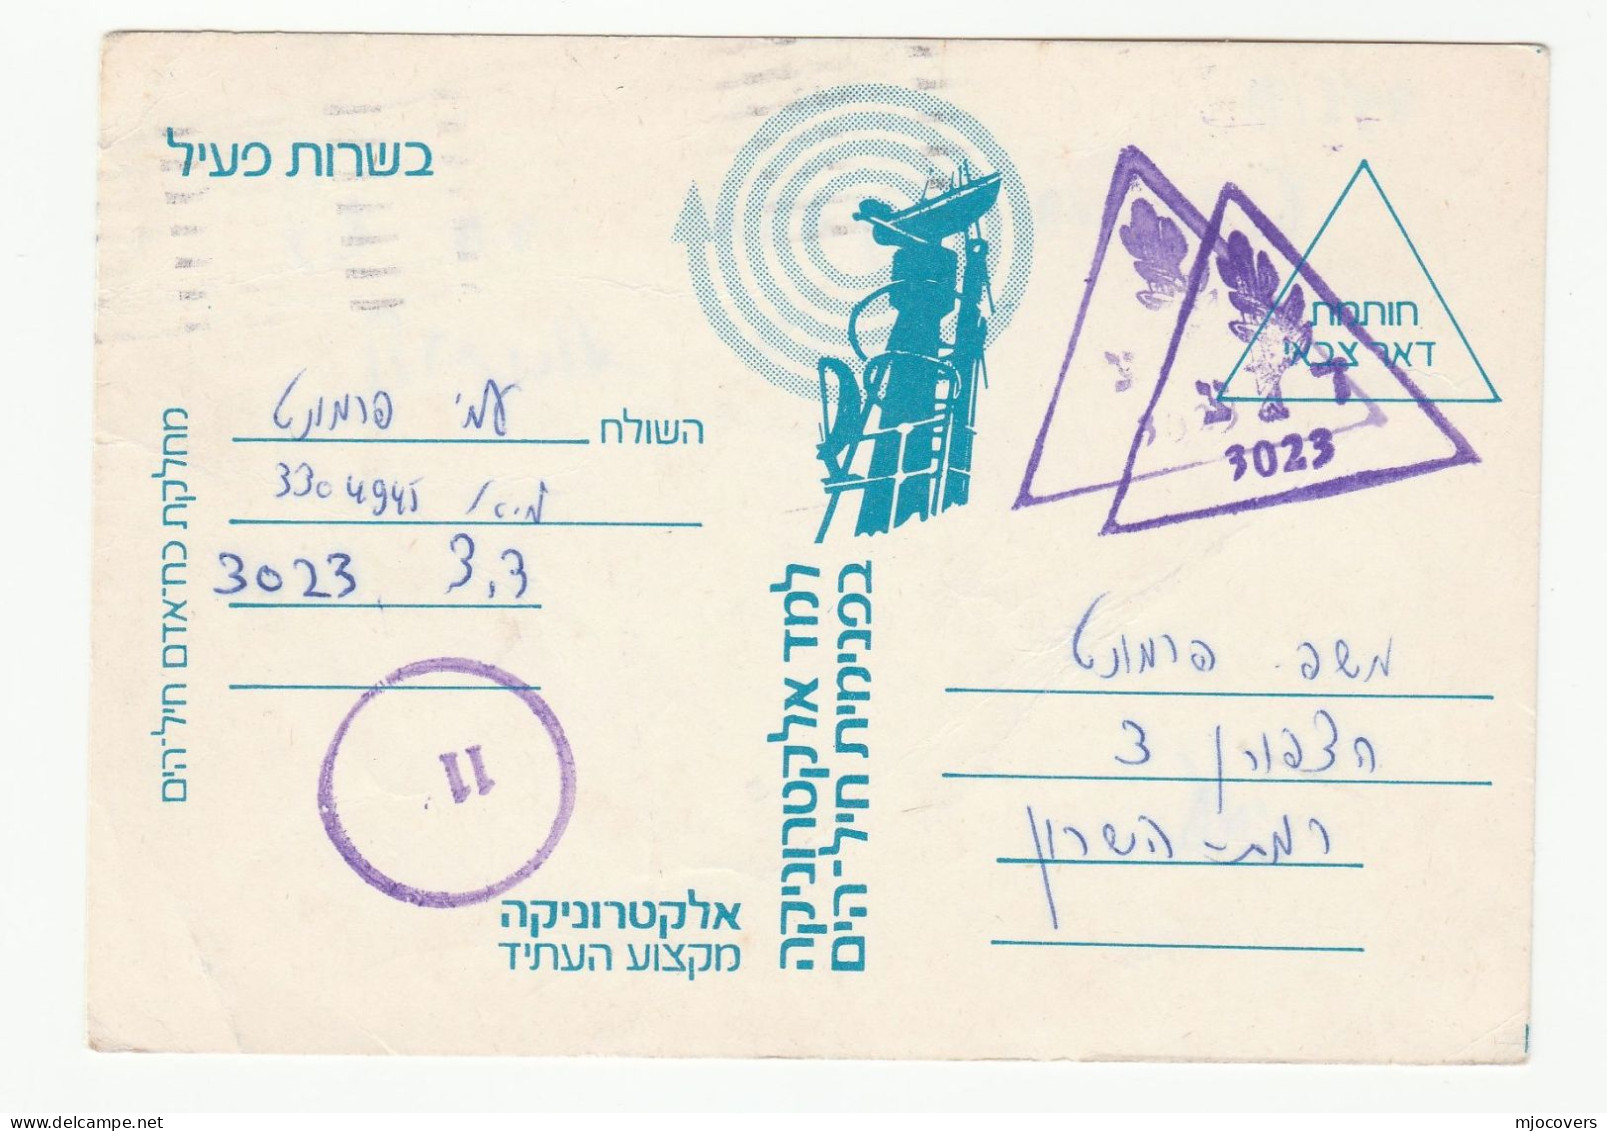 1979 Israel NAVY MILITARY SERVICE CARD  Forces Mail SHIP Cover Zahal Postcard Unit 3023 Naval Electronics School - Lettres & Documents